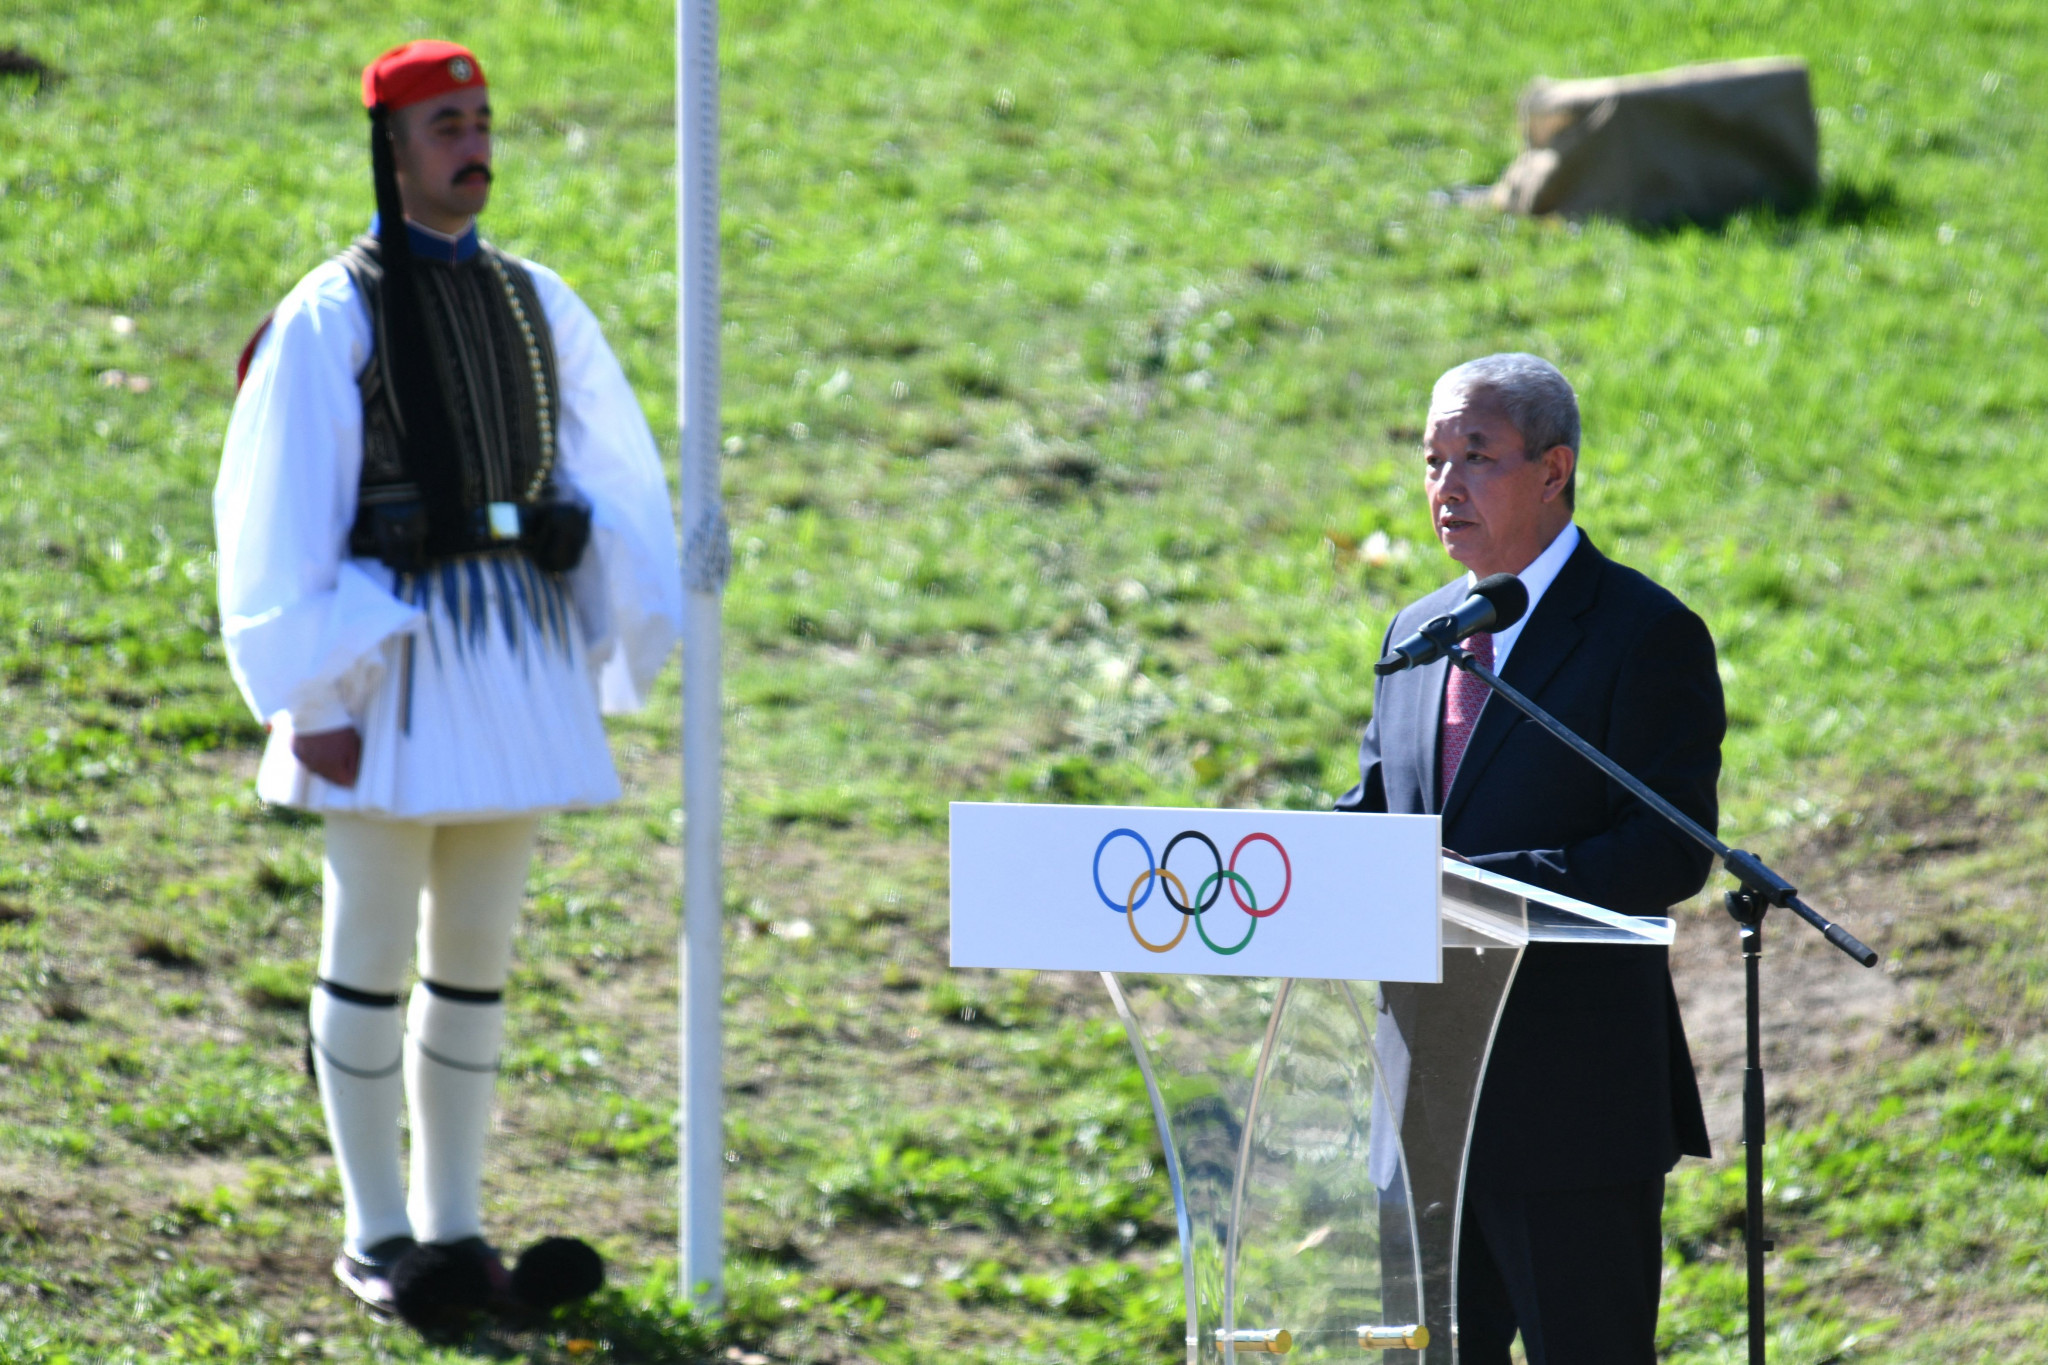 Beijing 2022 vice-president Yu Ziaqing speaks during the Flame Lighting Ceremony in Ancient Olympia ©Getty Images 